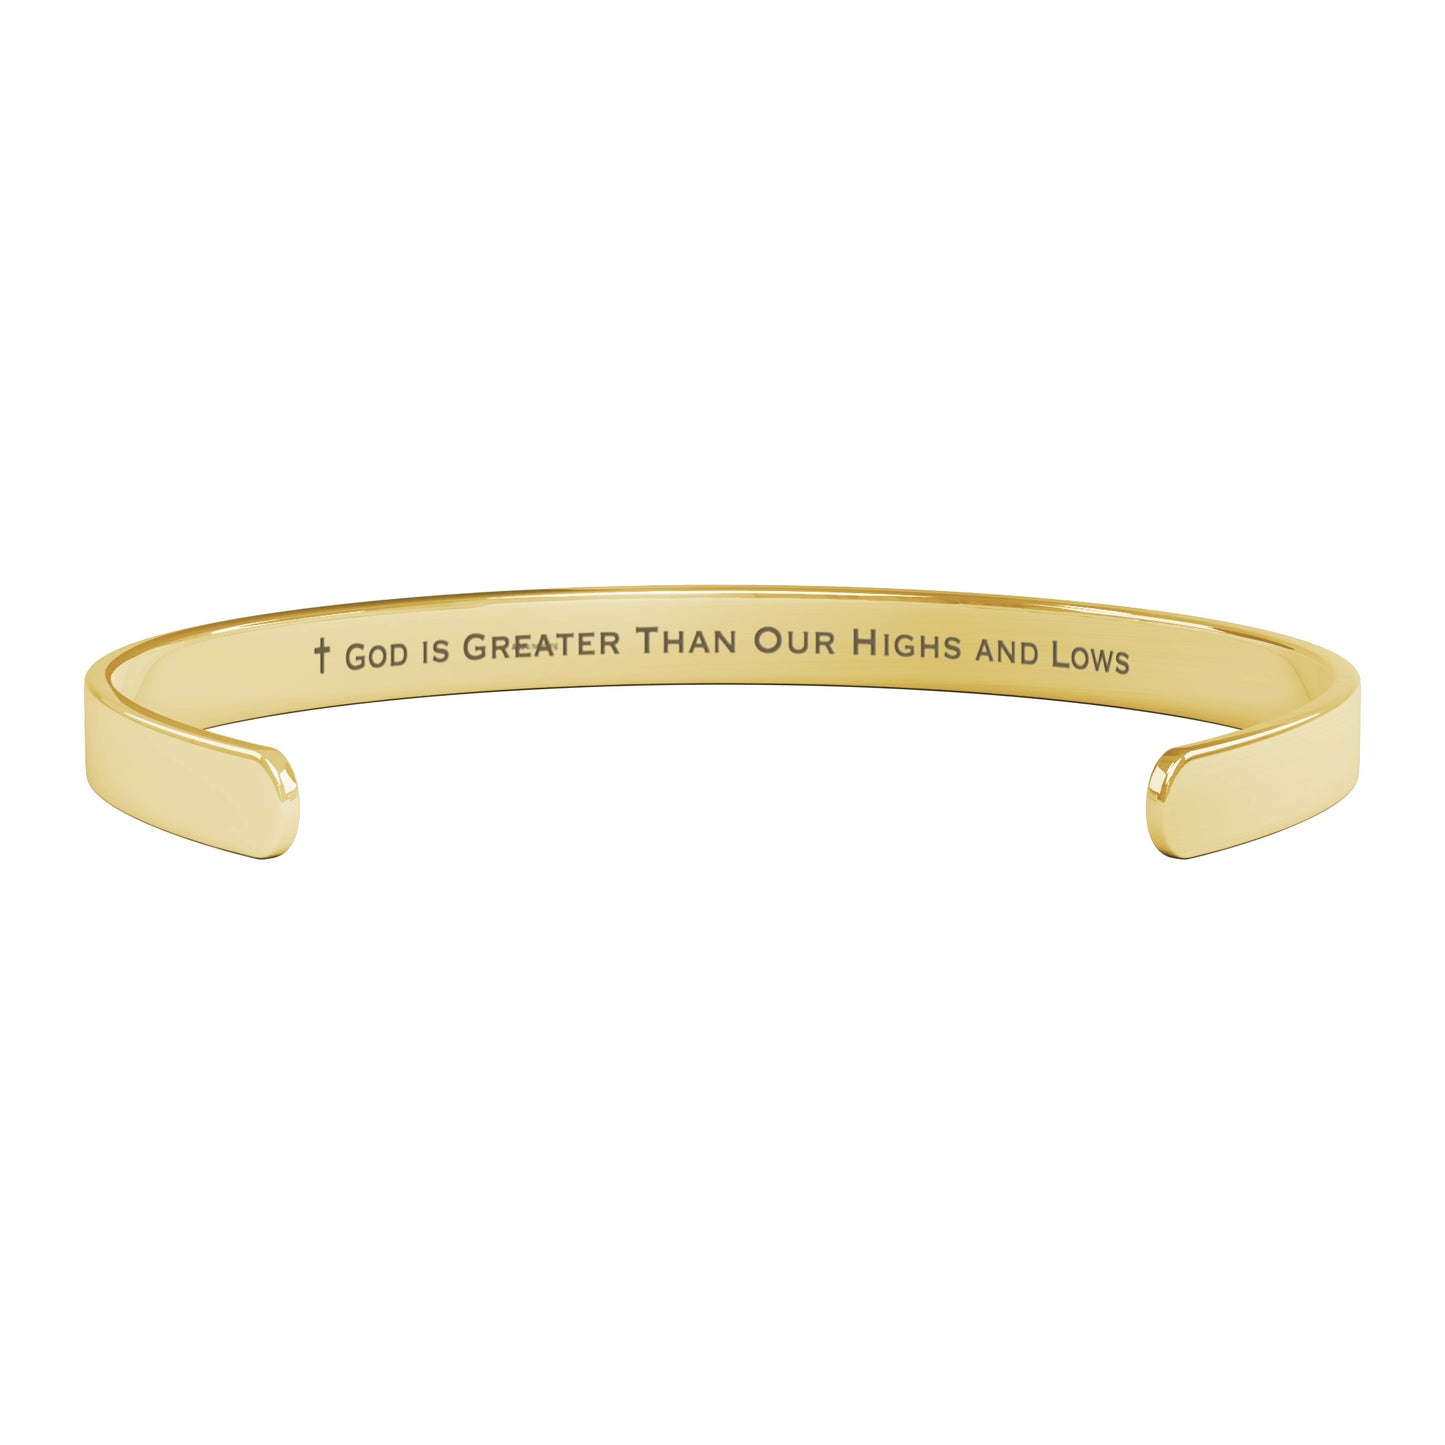 God is Greater Than Our Highs and Lows Cuff Bracelet